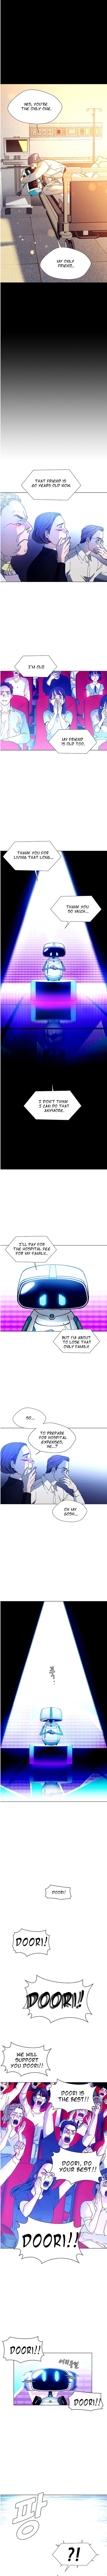 If AI Ruled the World Chapter 7 - Page 7